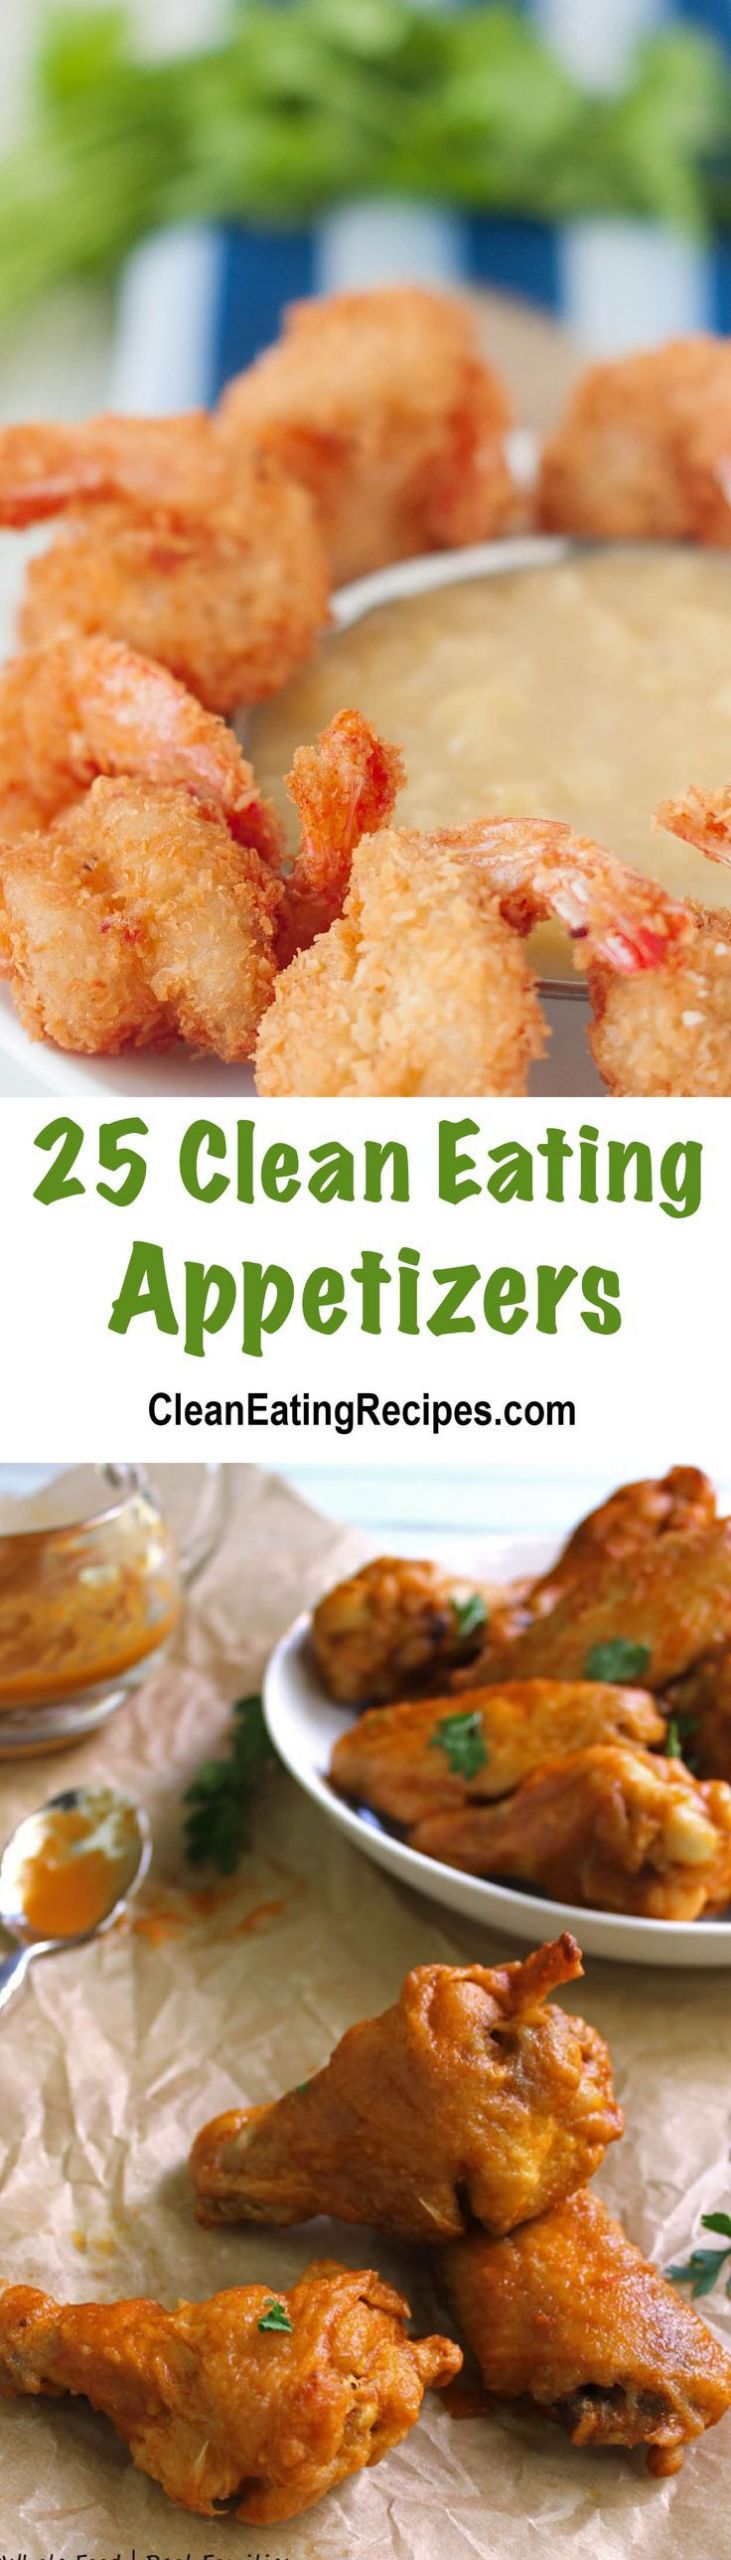 Clean Eating Appetizers
 To be Clean eating and Appetizer recipes on Pinterest